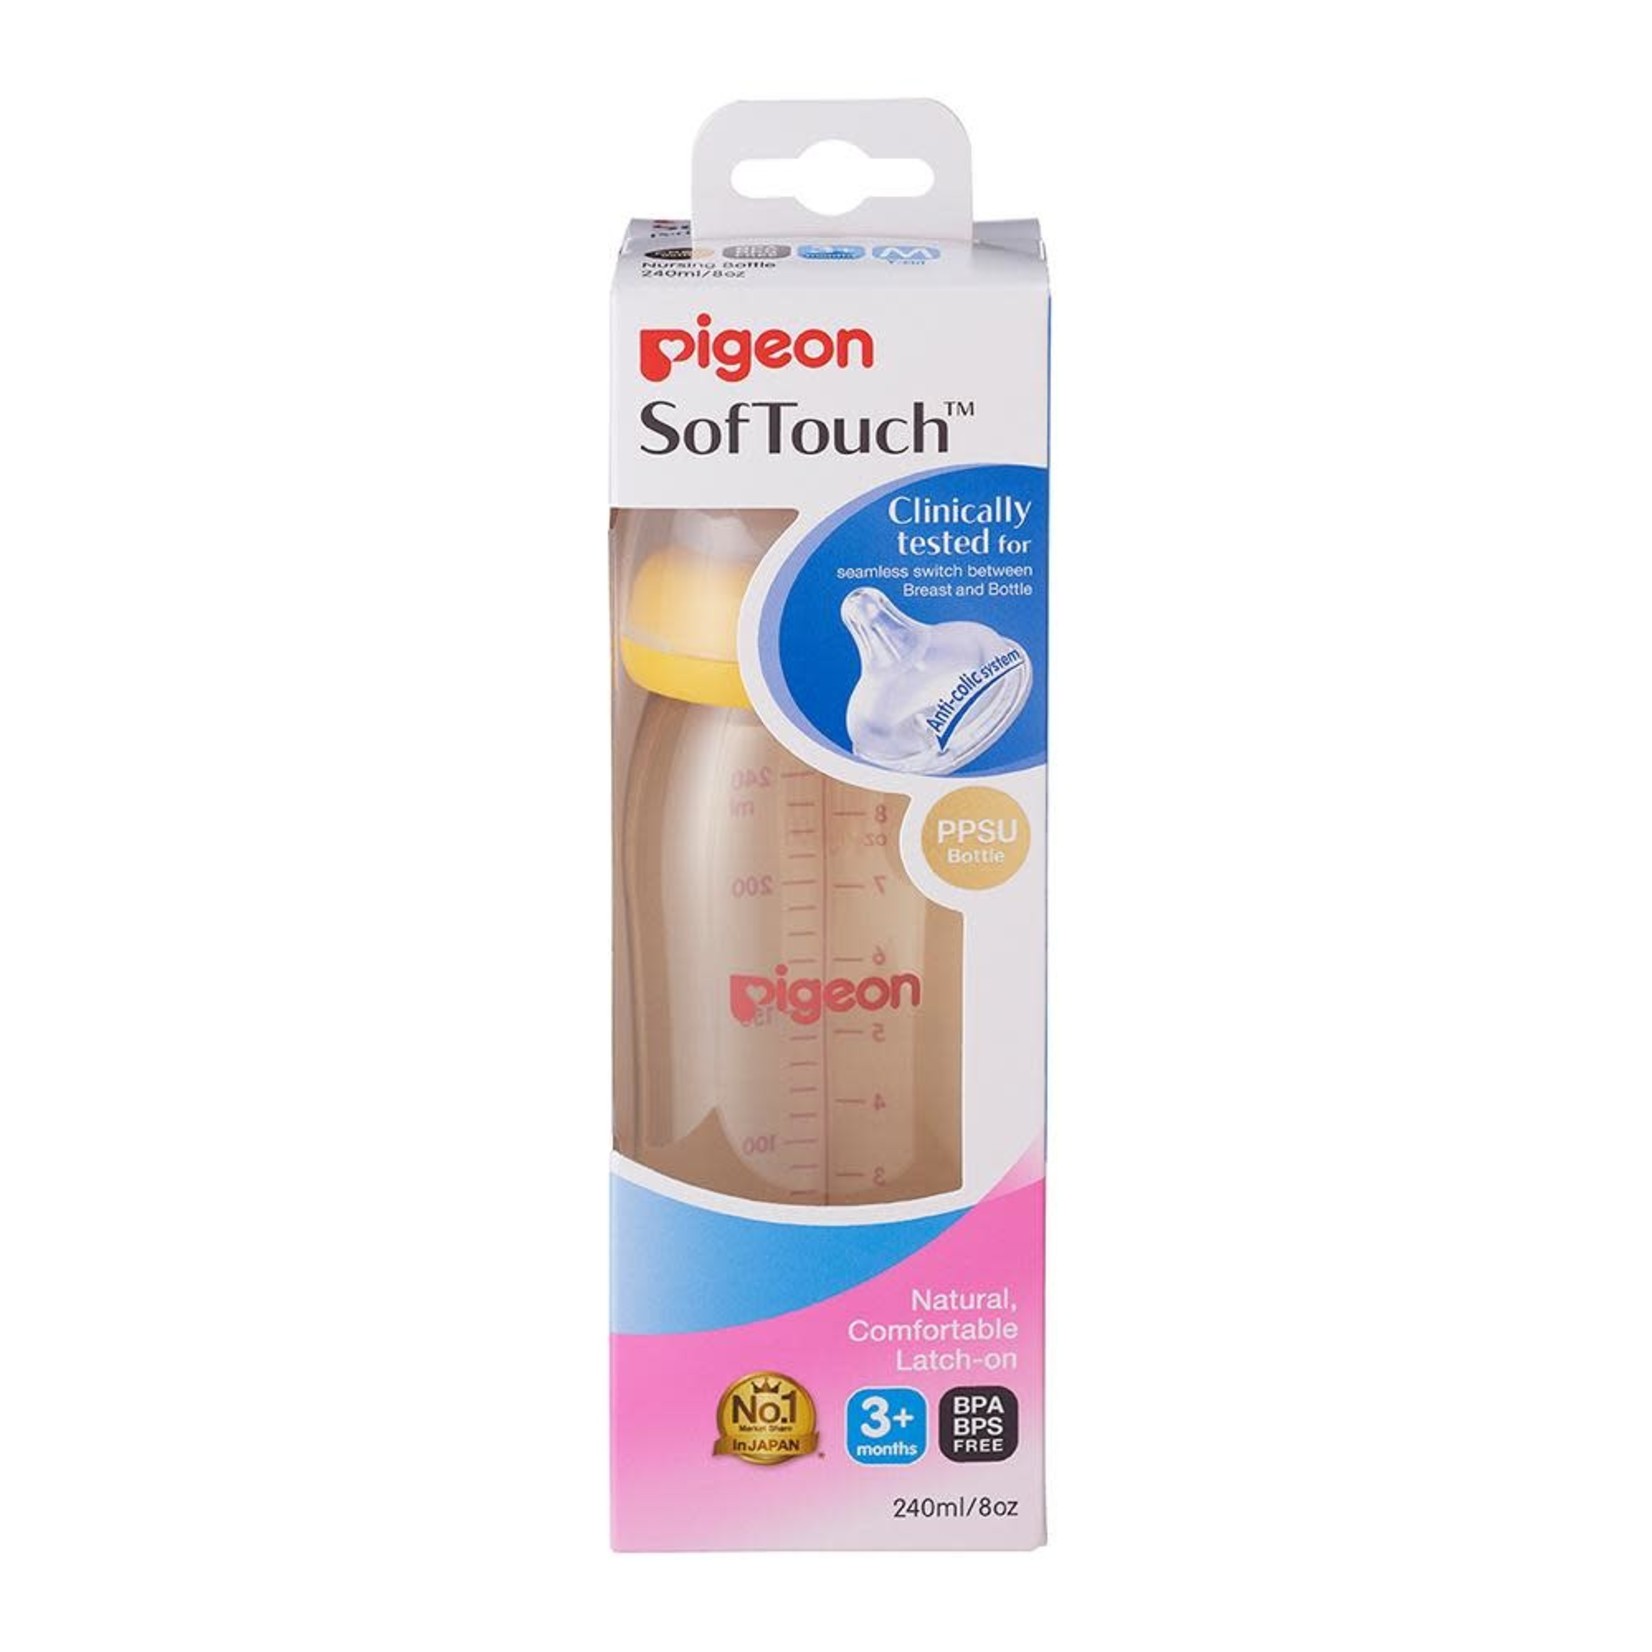 Pigeon SofTouch™ Bottle(PPSU) 240ml